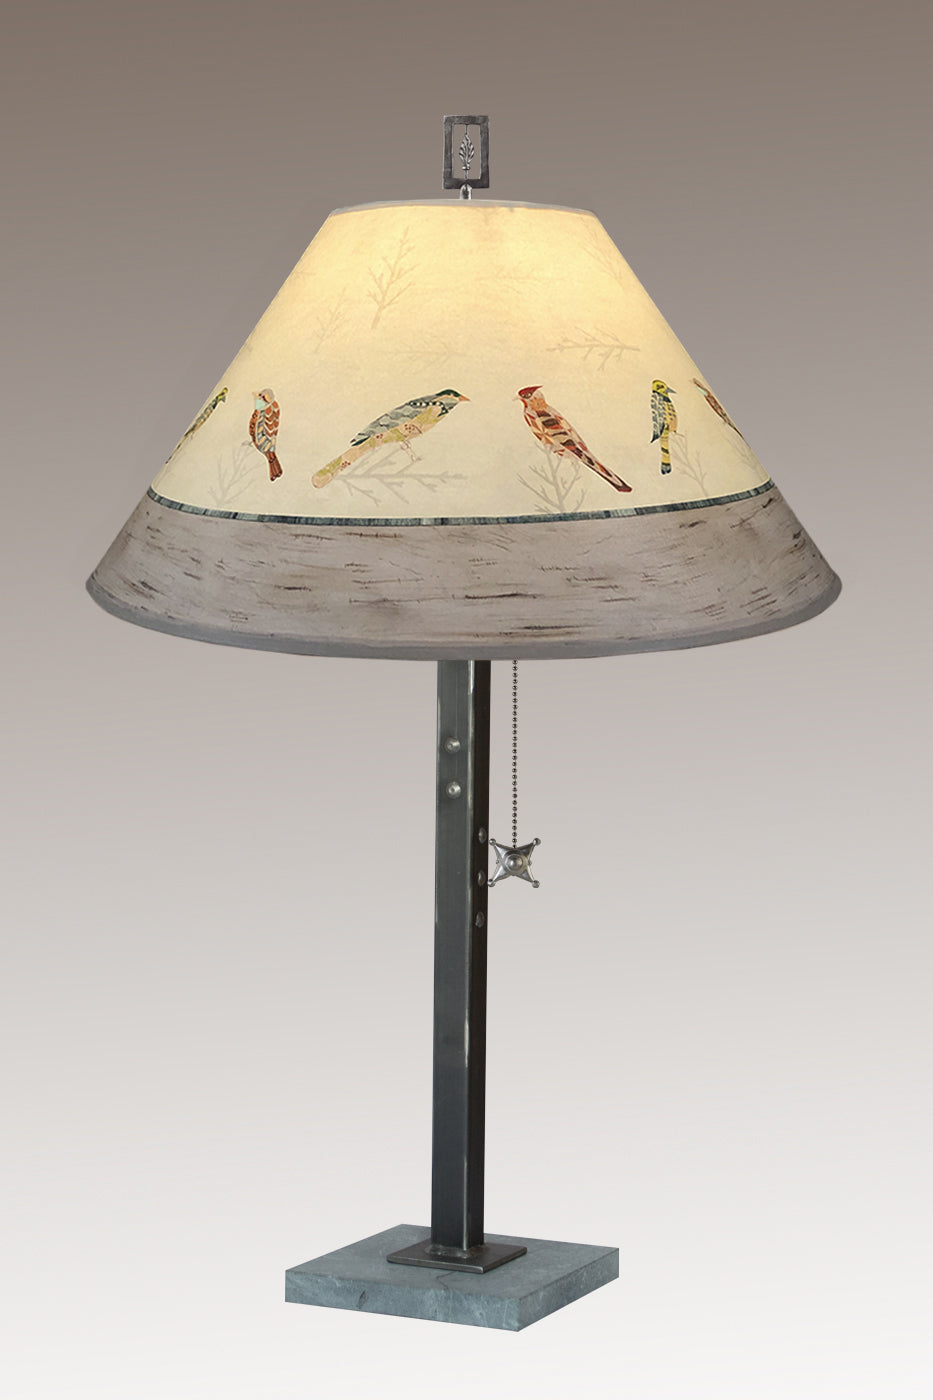 Janna Ugone &amp; Co Table Lamps Steel Table Lamp with Large Conical Shade in Bird Friends